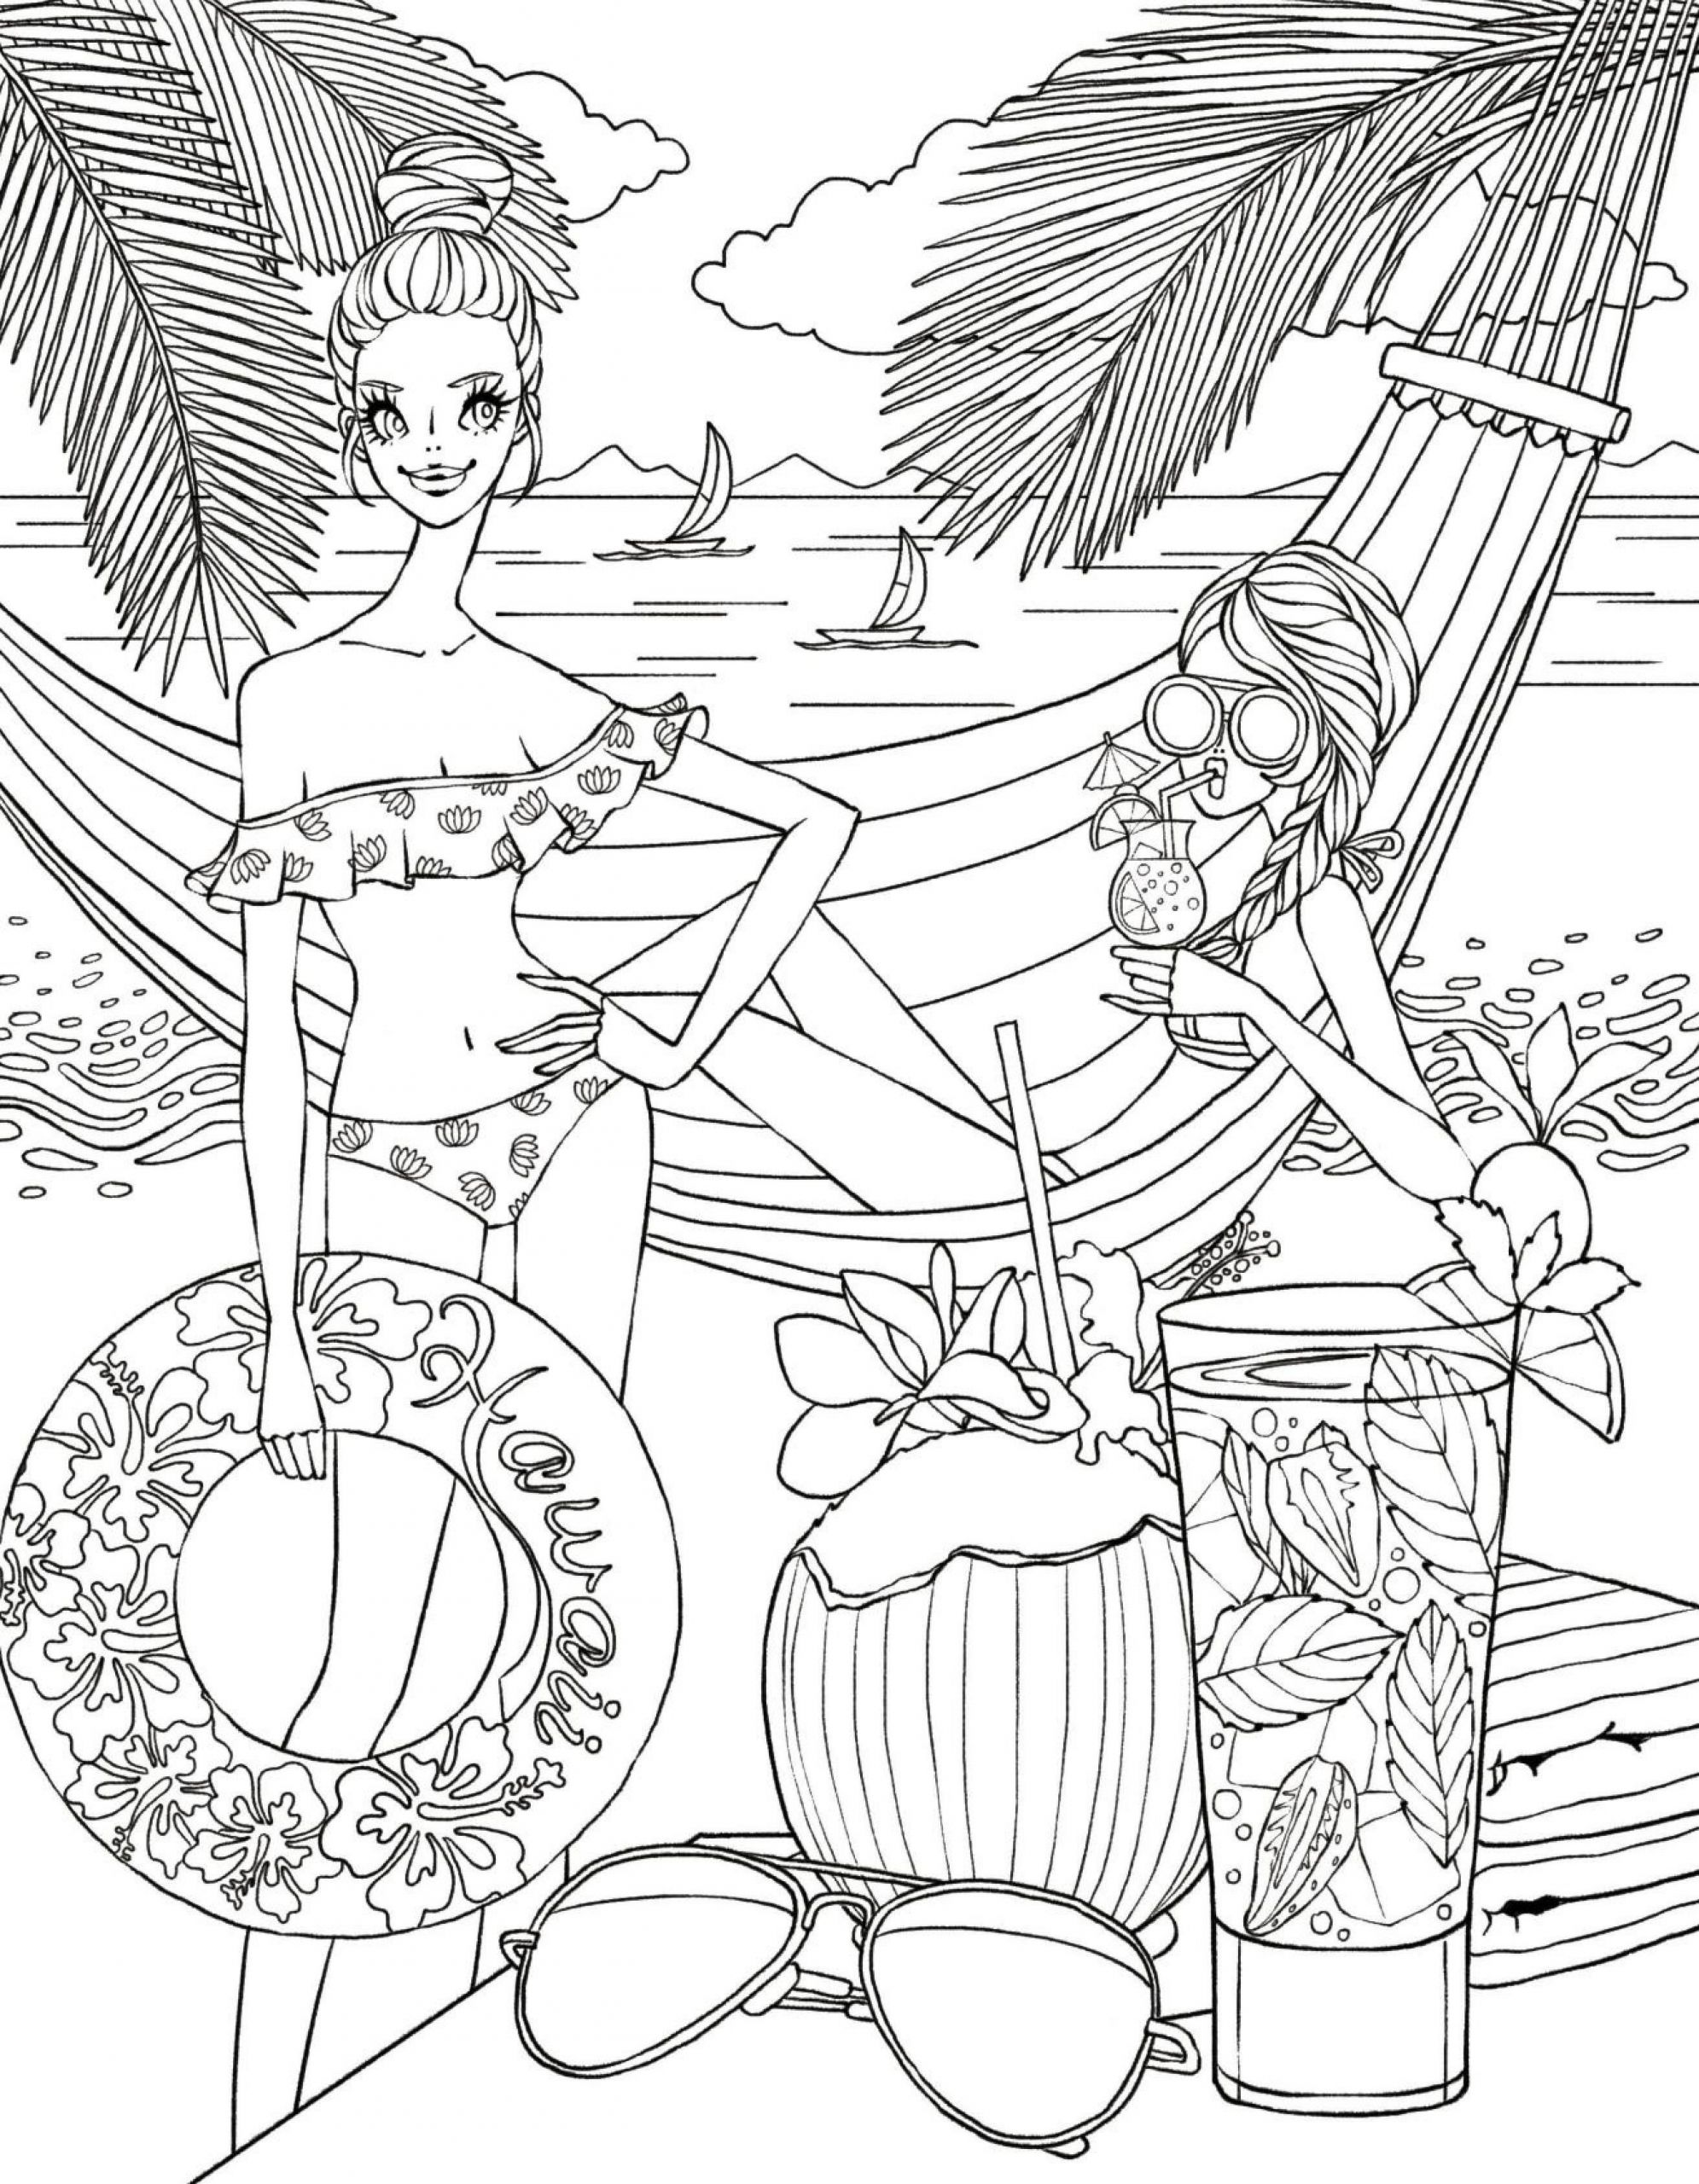 Beach Coloring Pages For Adults
 Beach side coloring page